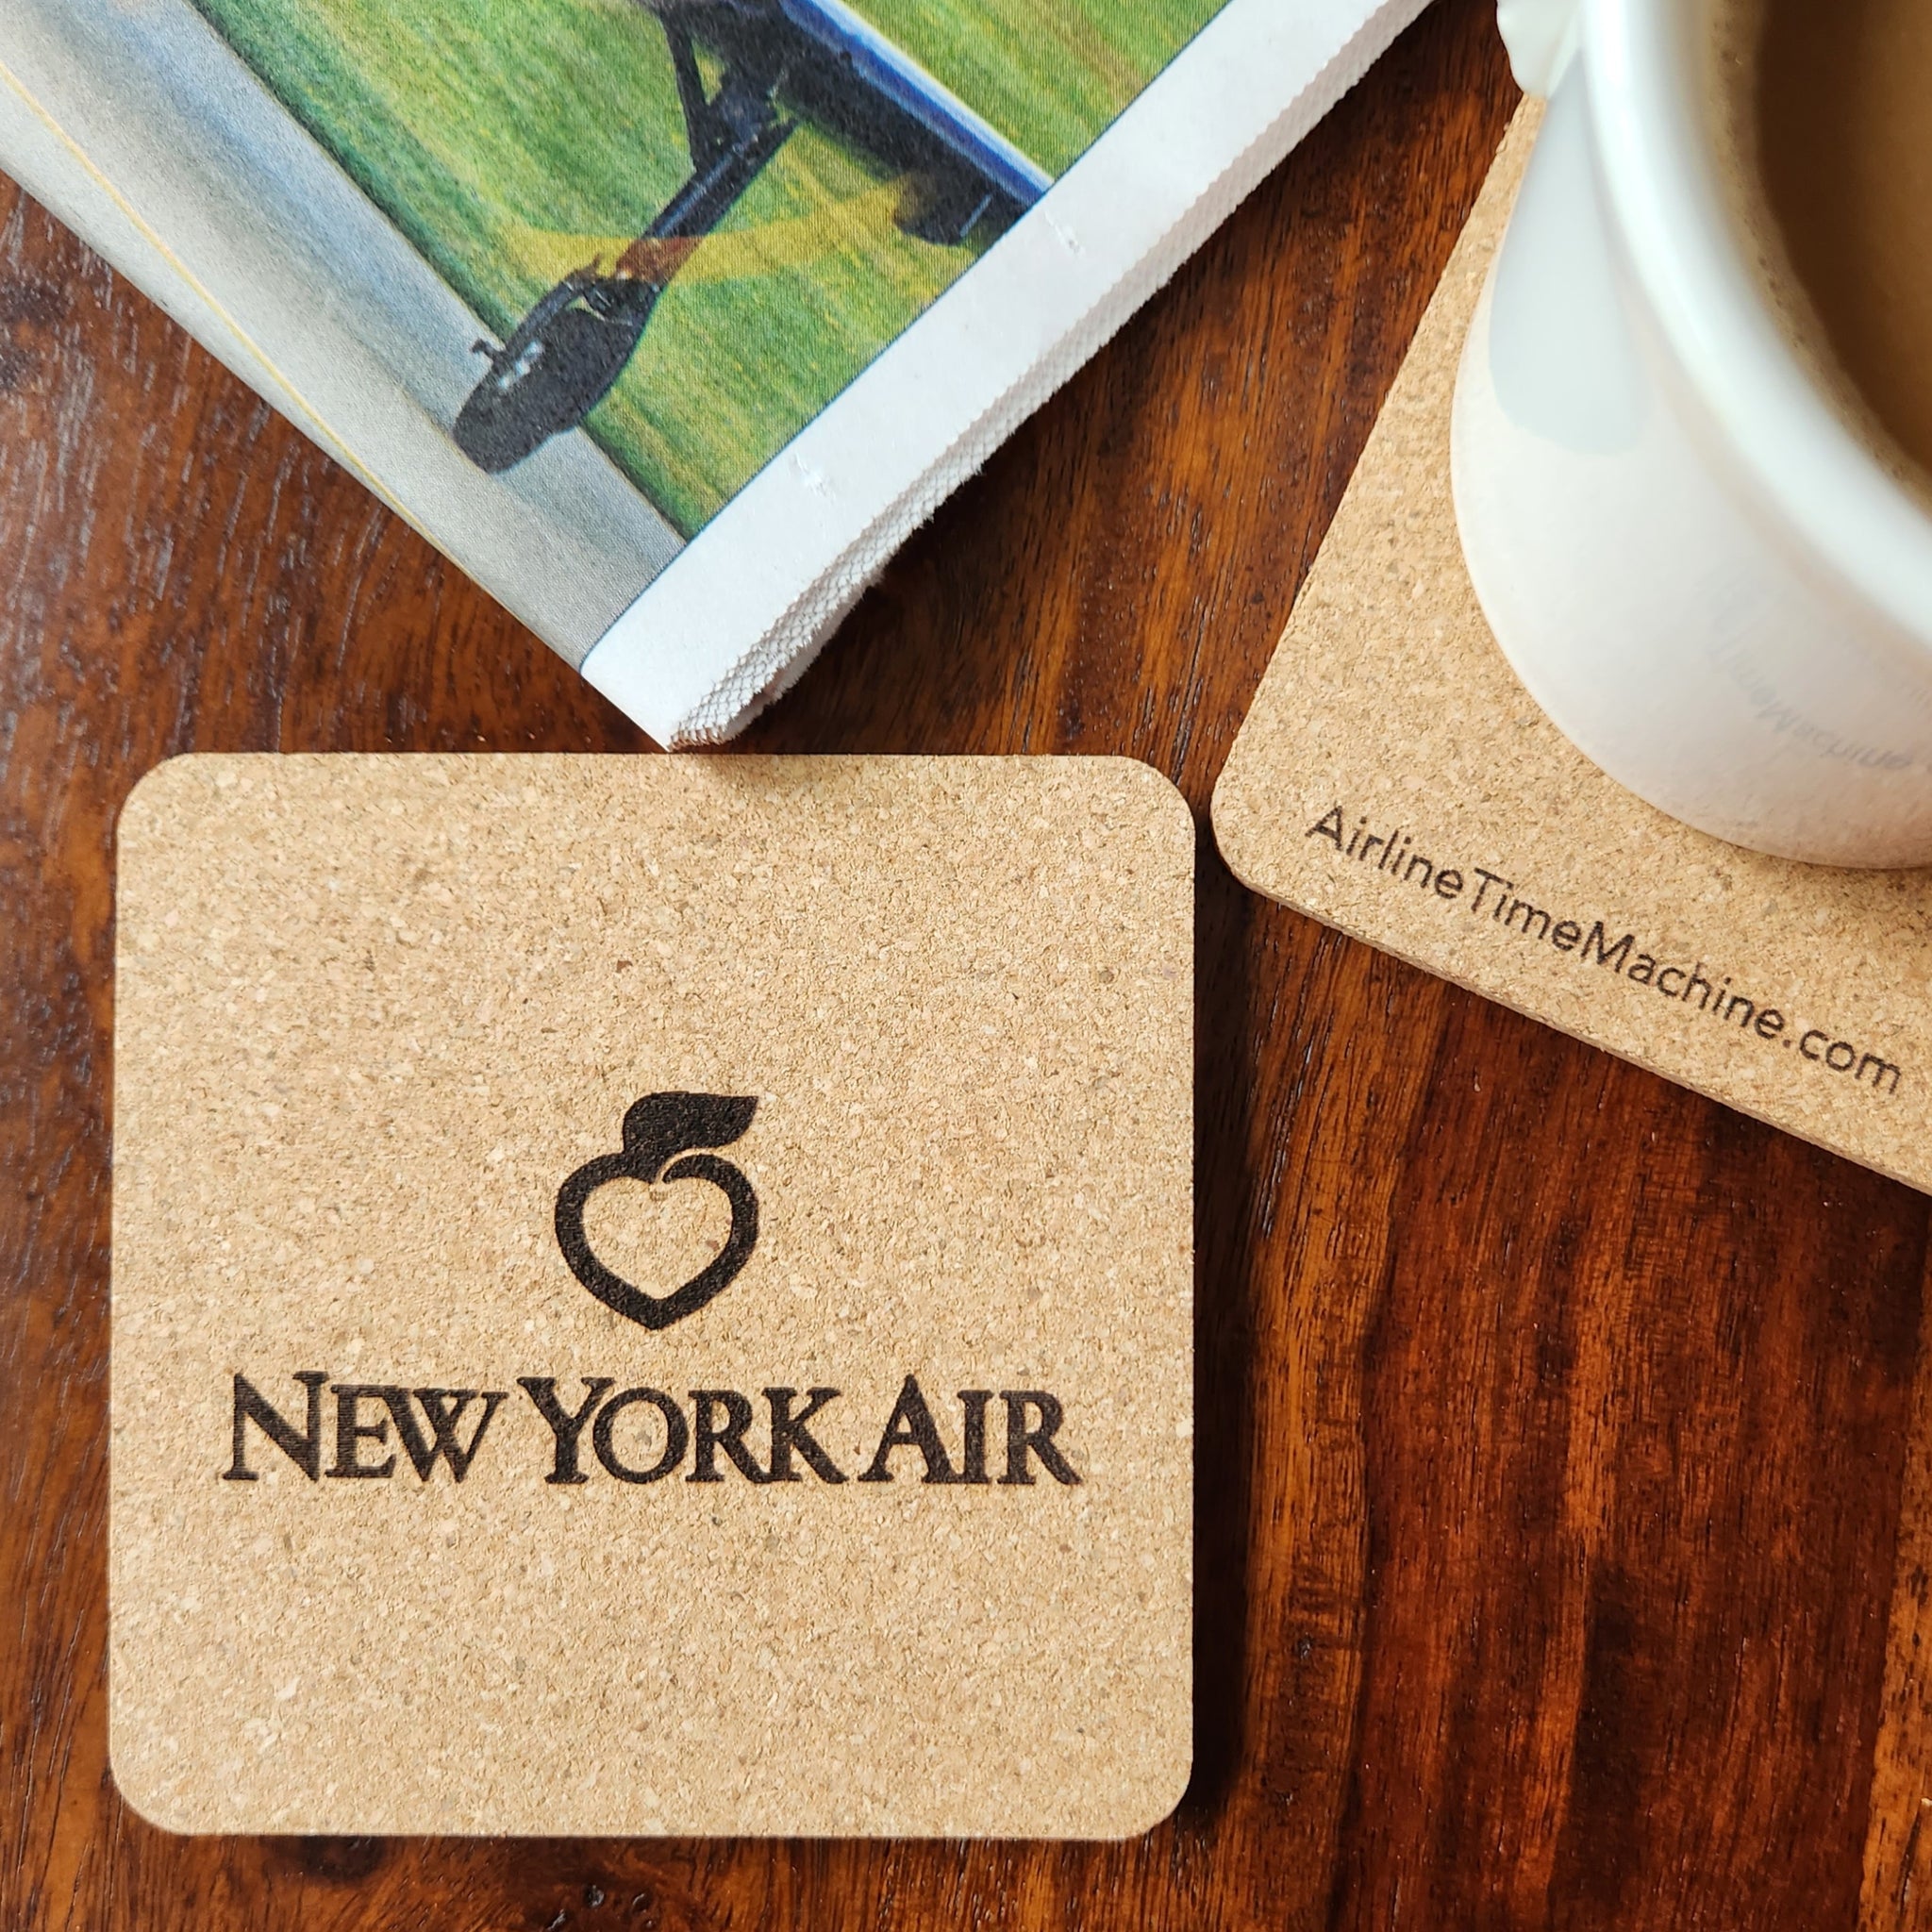 Image of cork coaster with New York AIr branding impression.